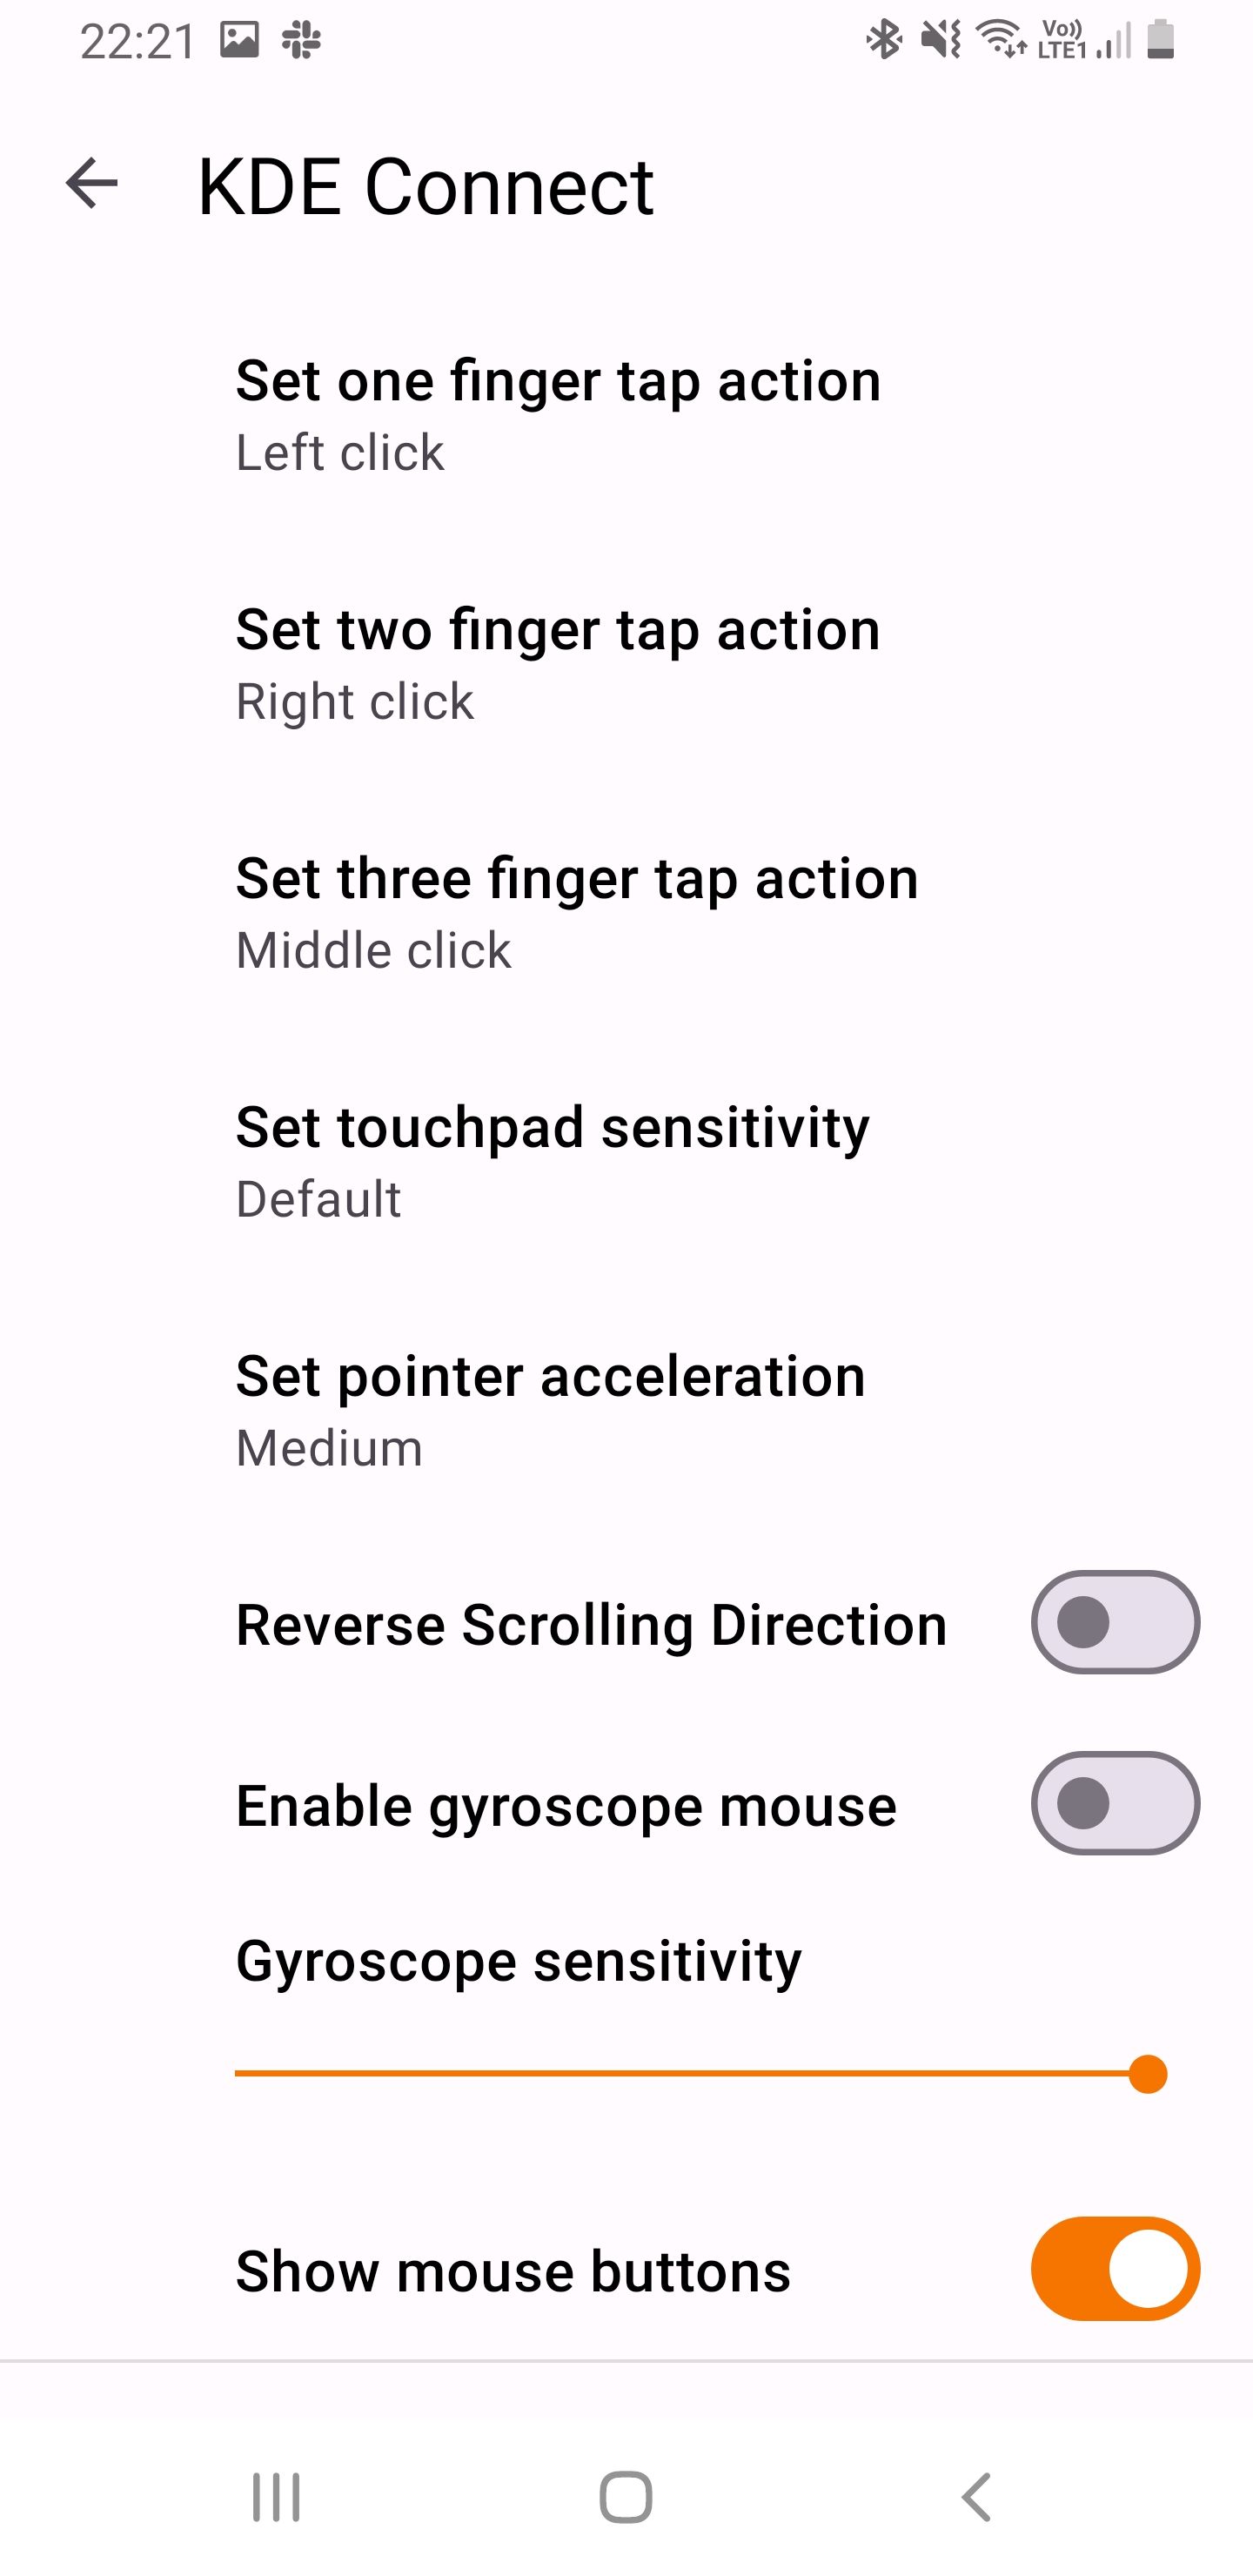 KDE Connect settings on Android